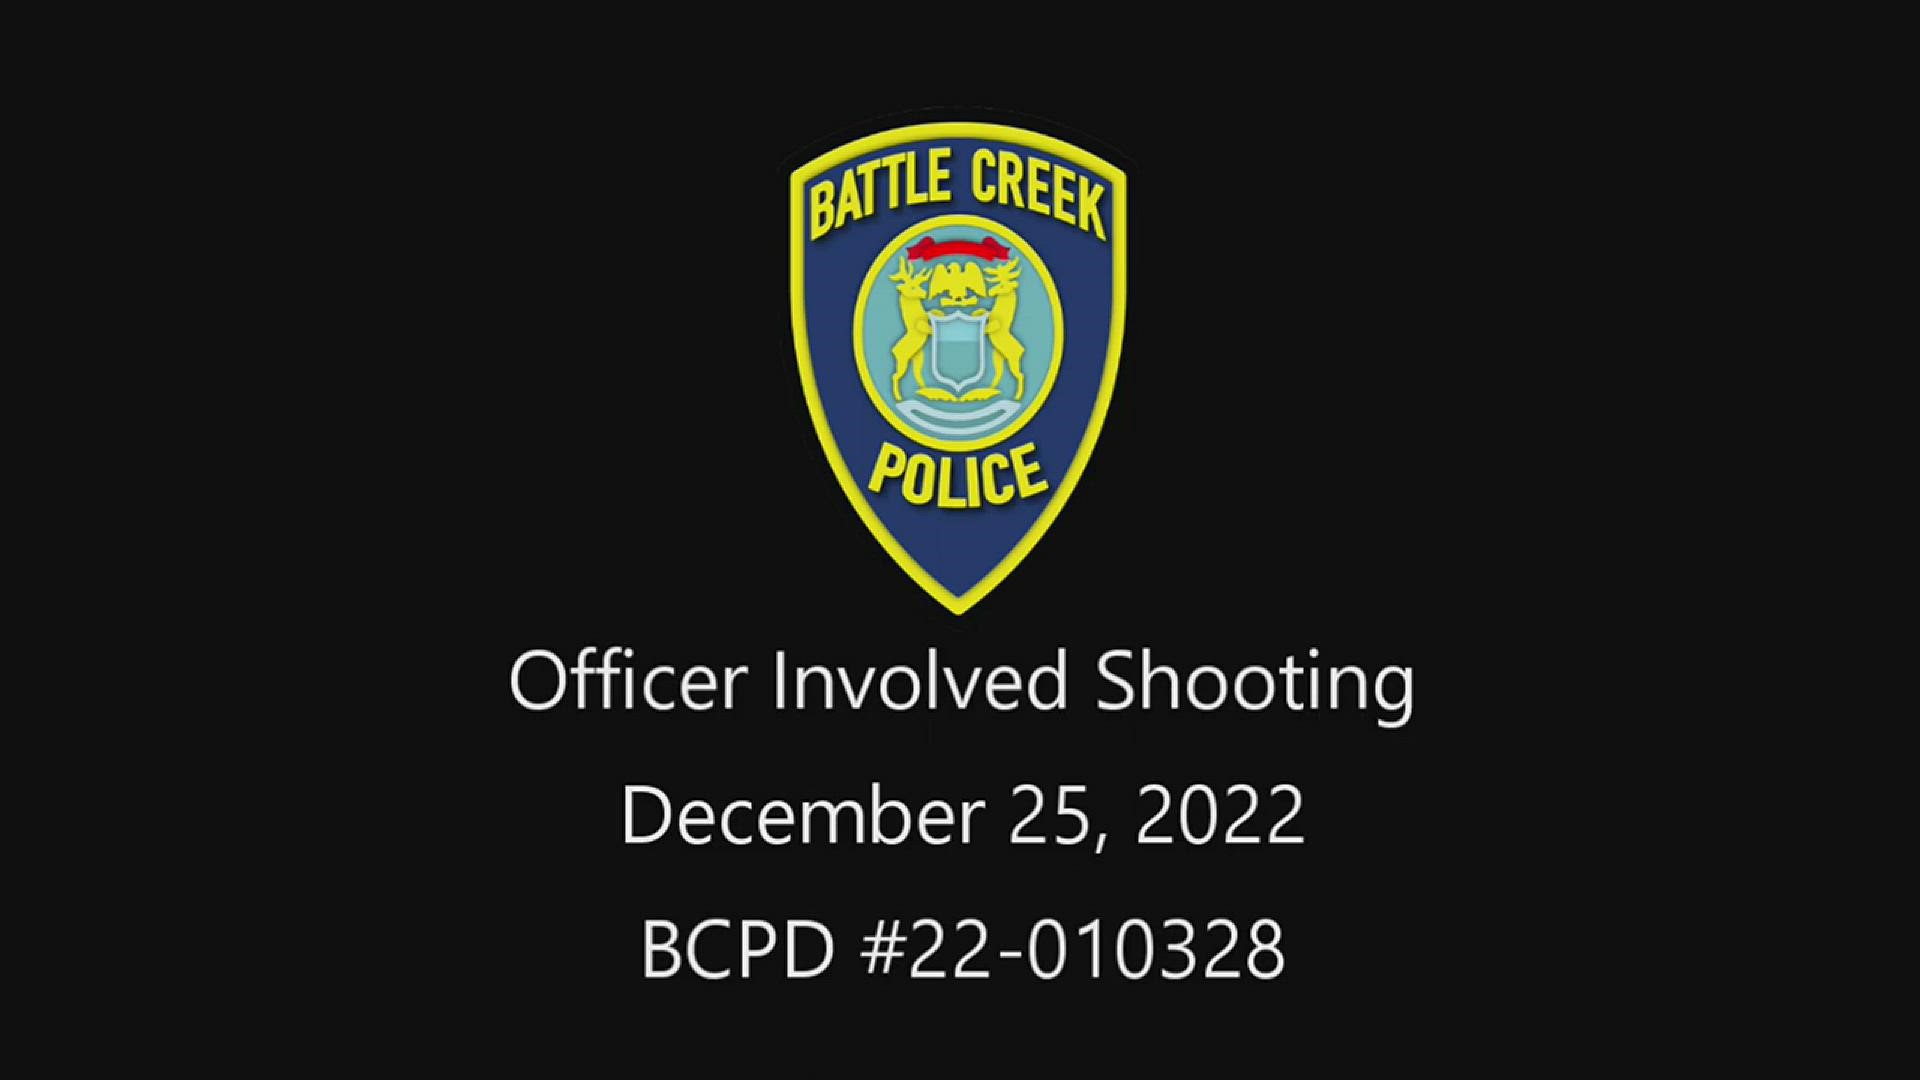 Battle Creek Police released bodycam video of officers shooting a man with a gun. WARNING: This video may not be suitable for all viewers.